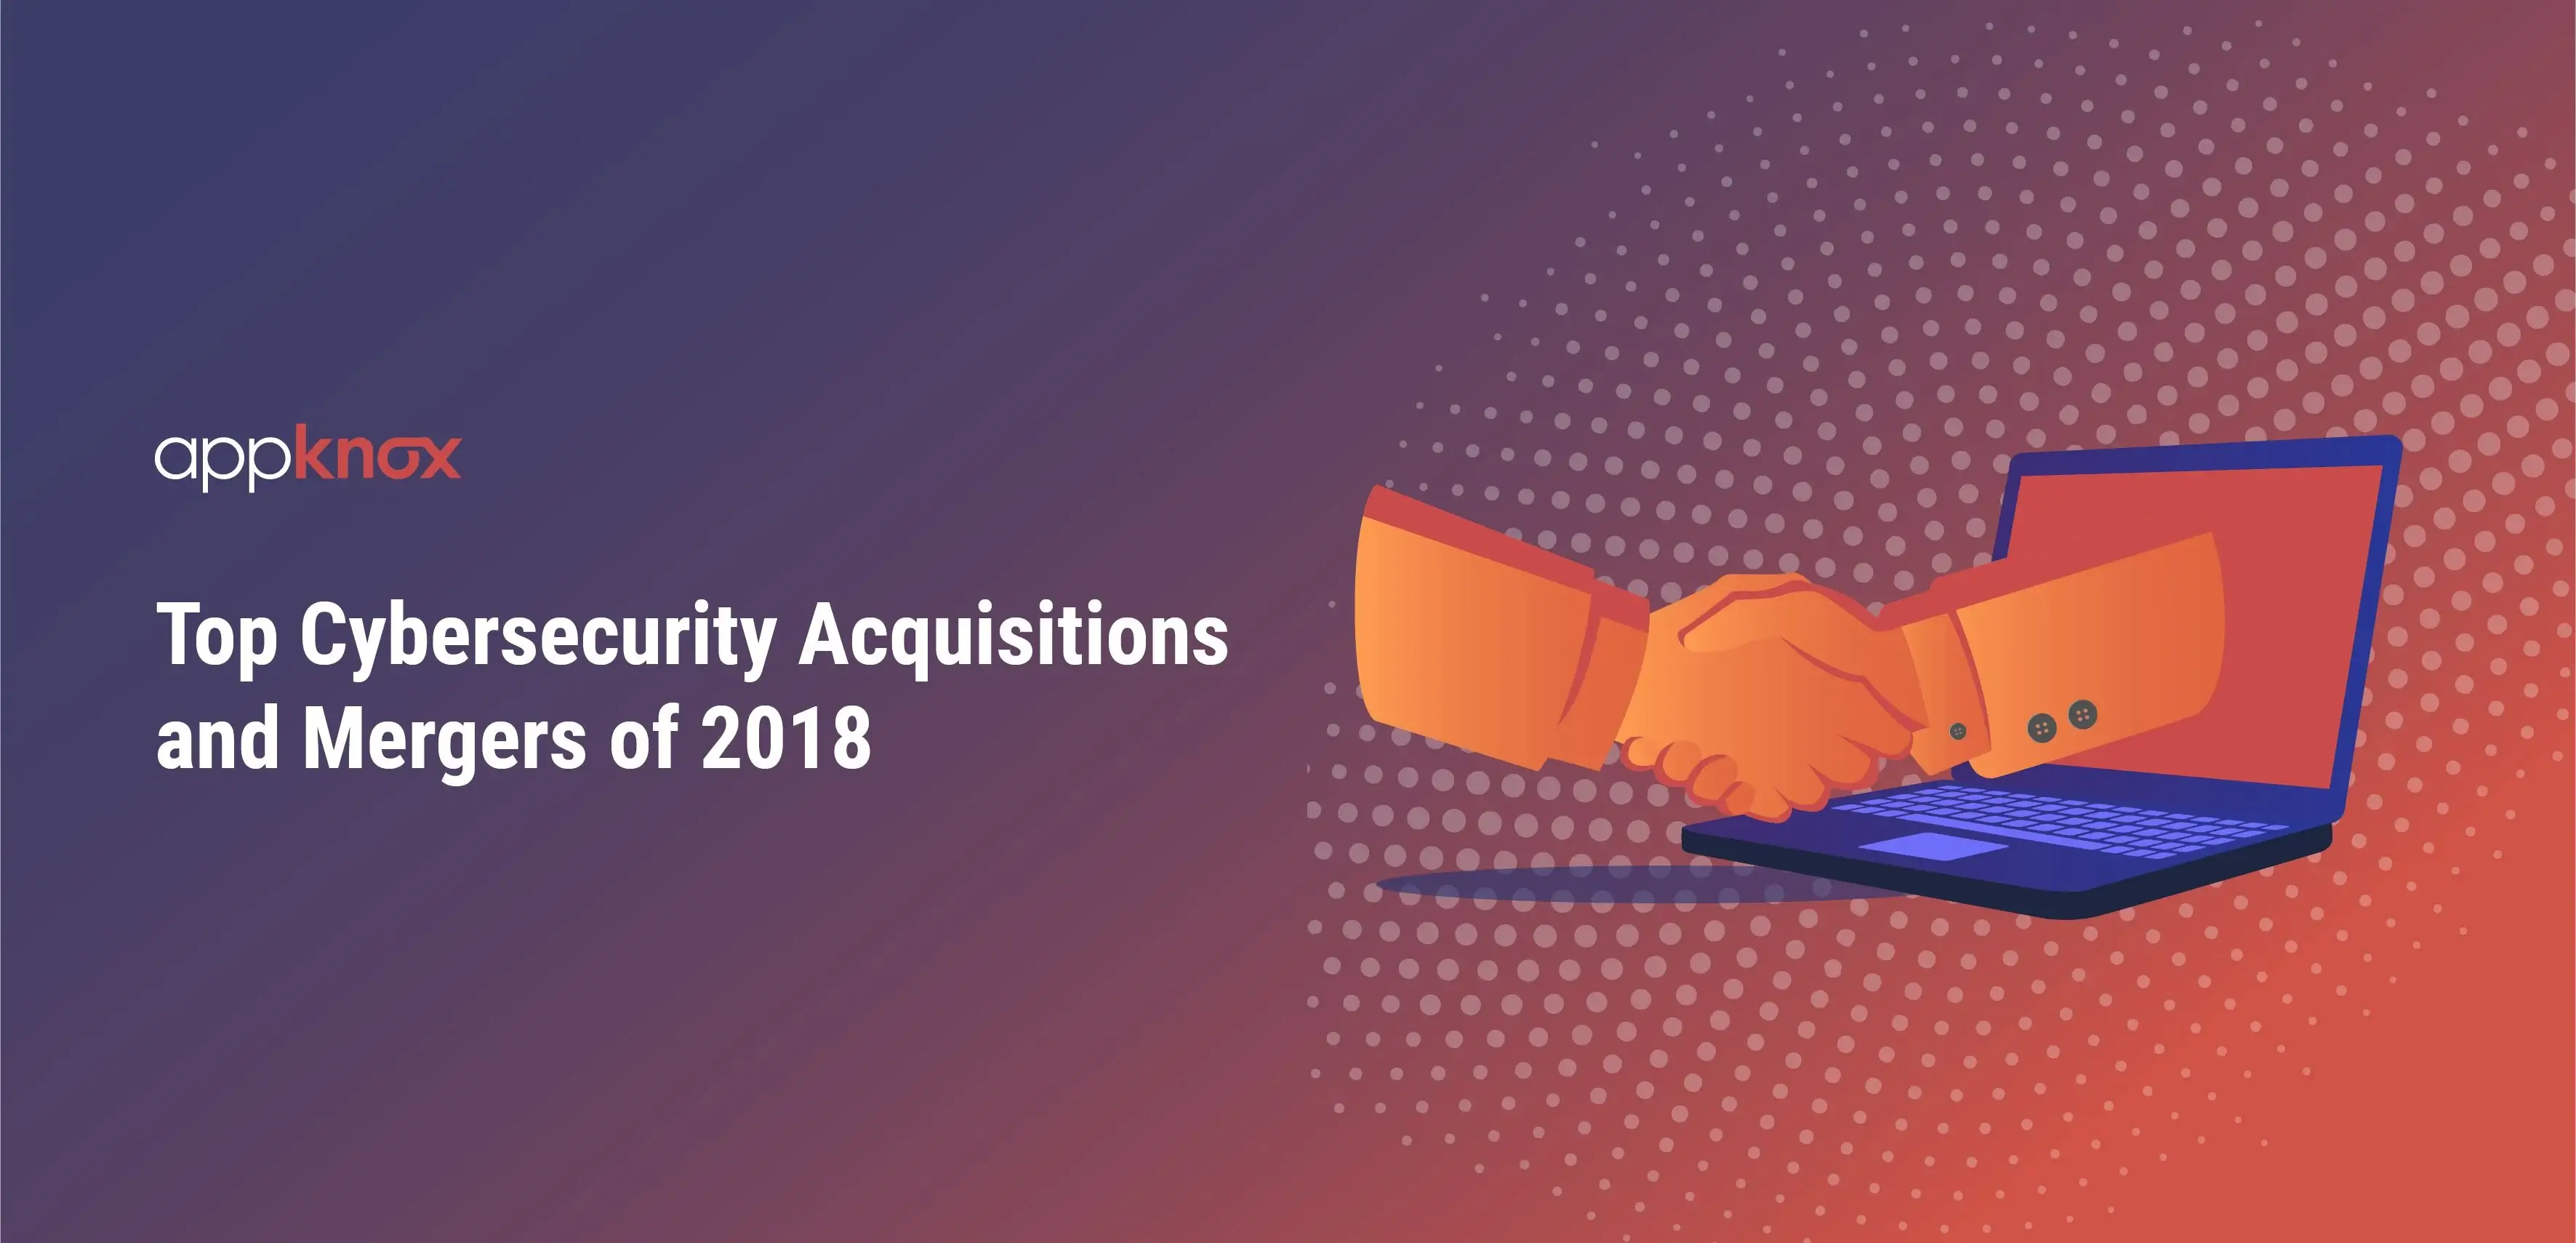 Top Cybersecurity Acquisitions and Mergers of 2018